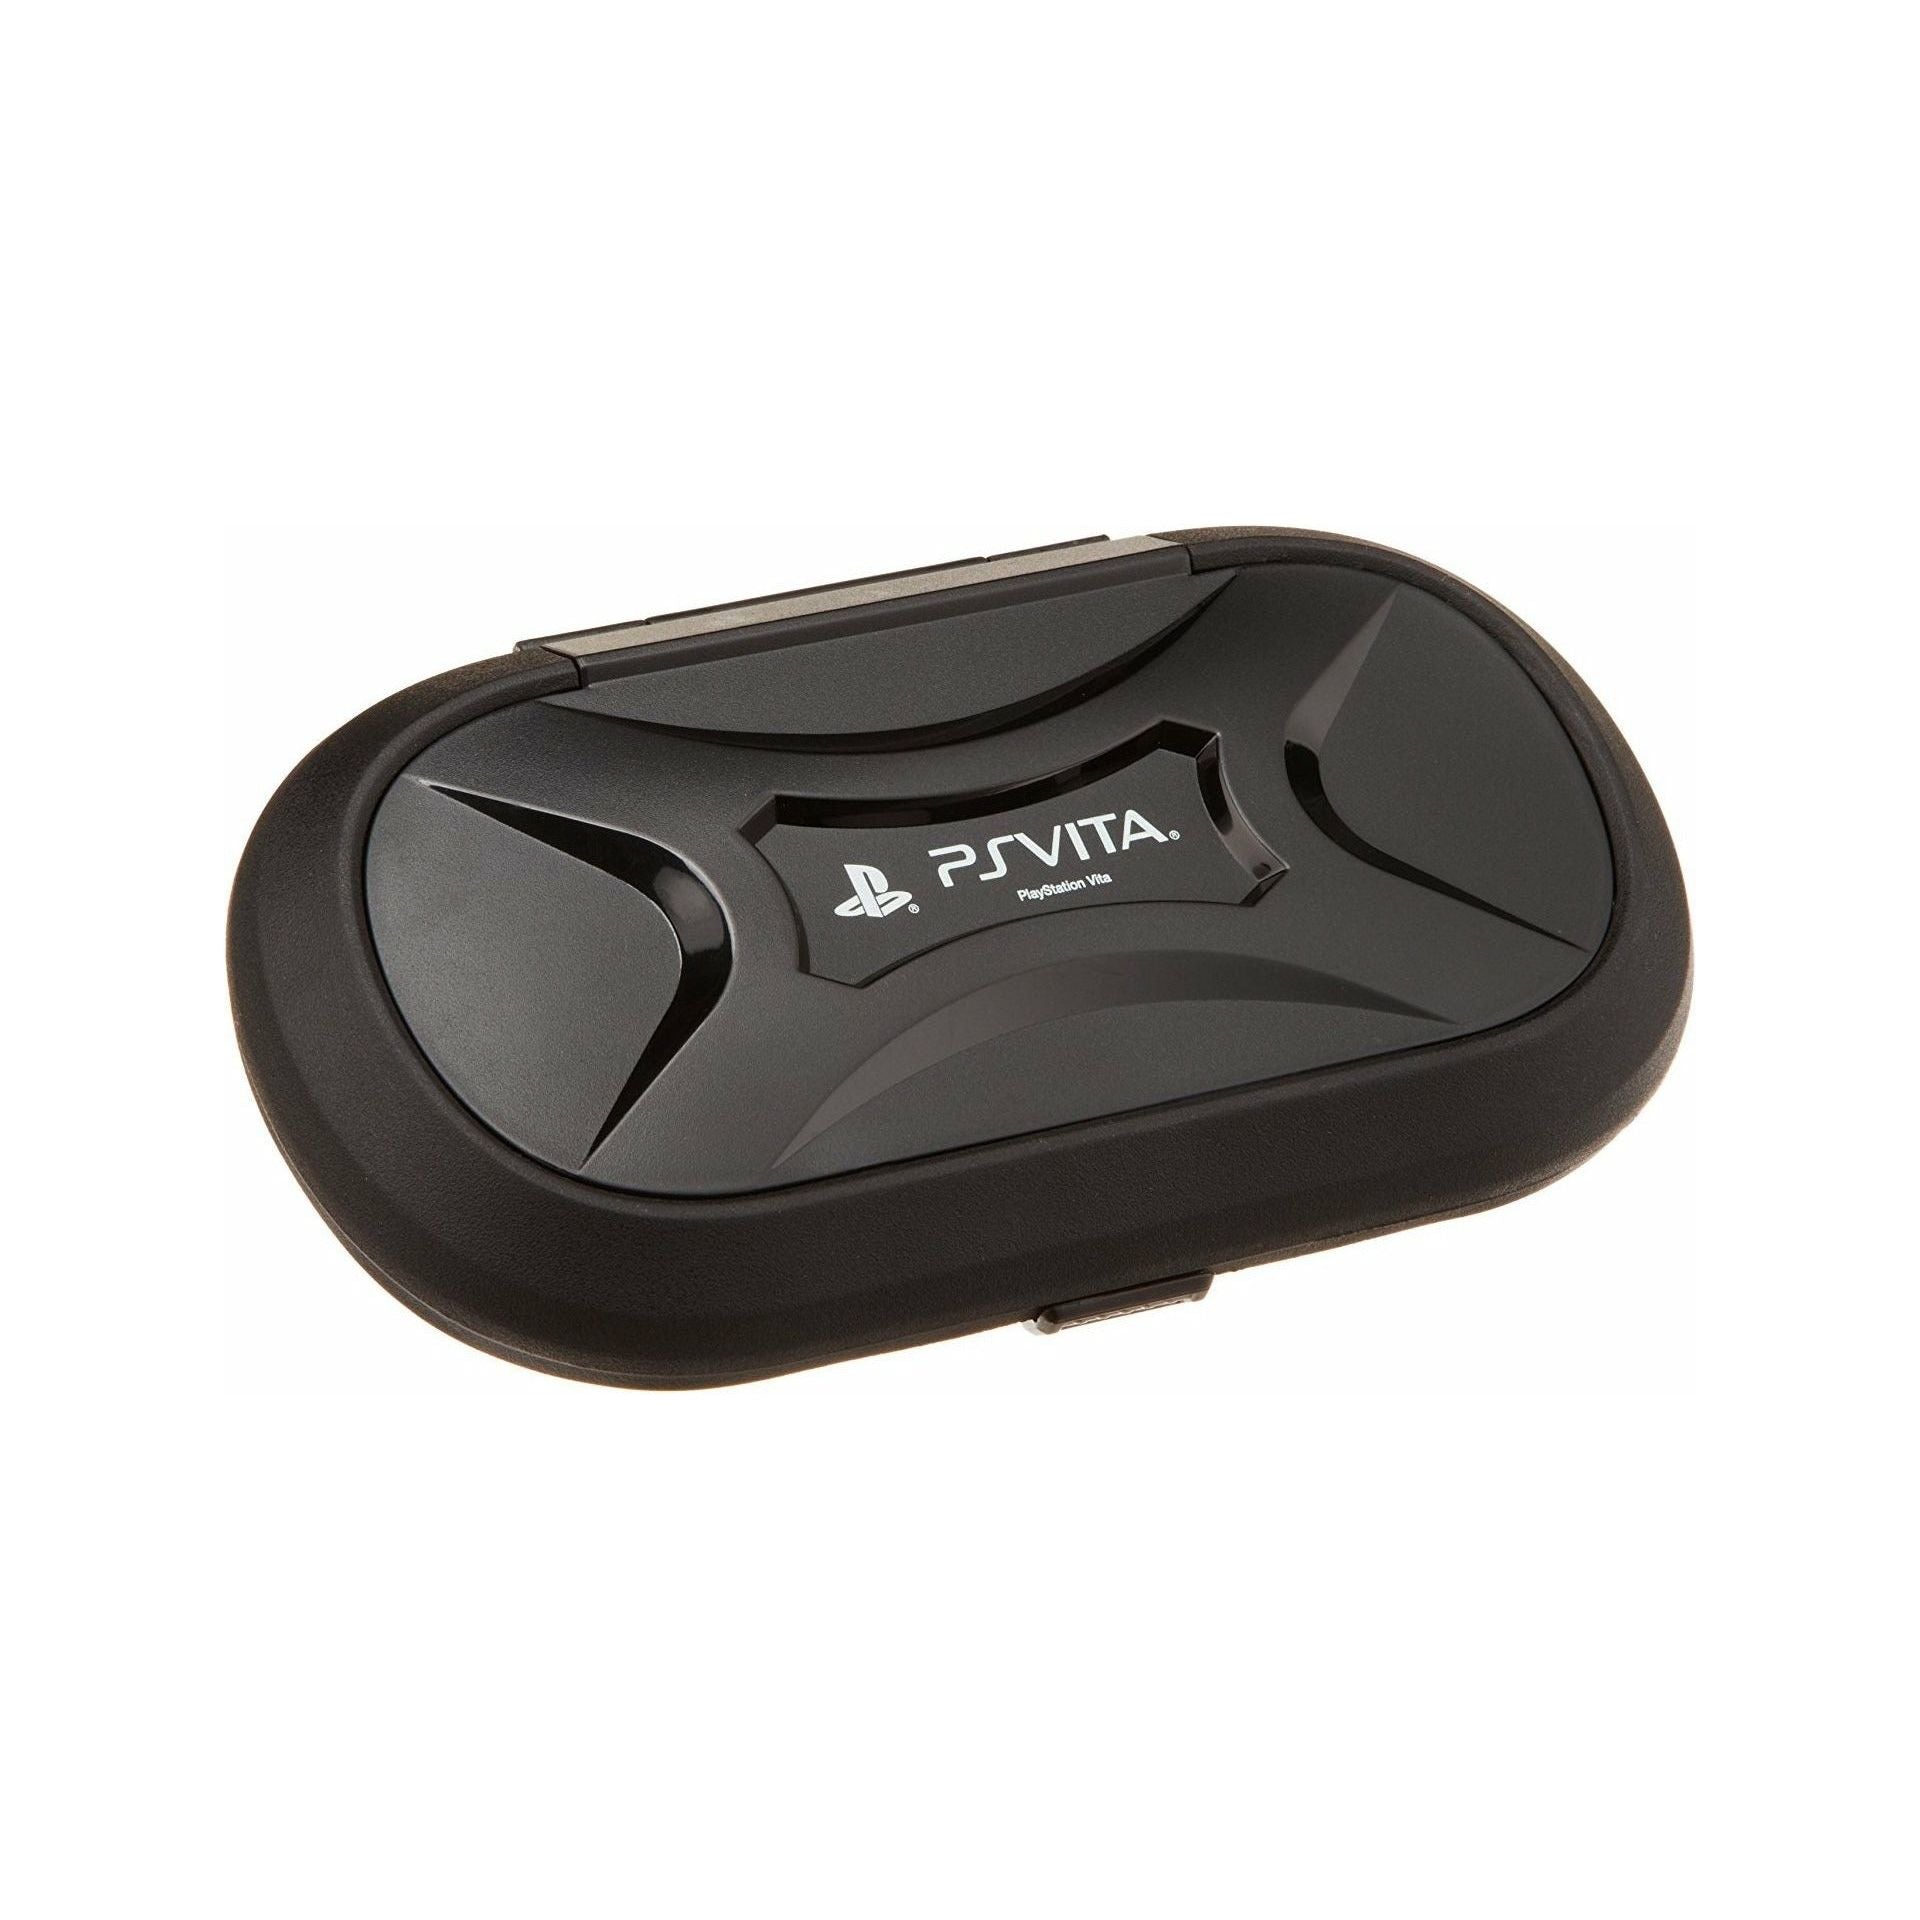 Official Sony PS Vita Carrying Case